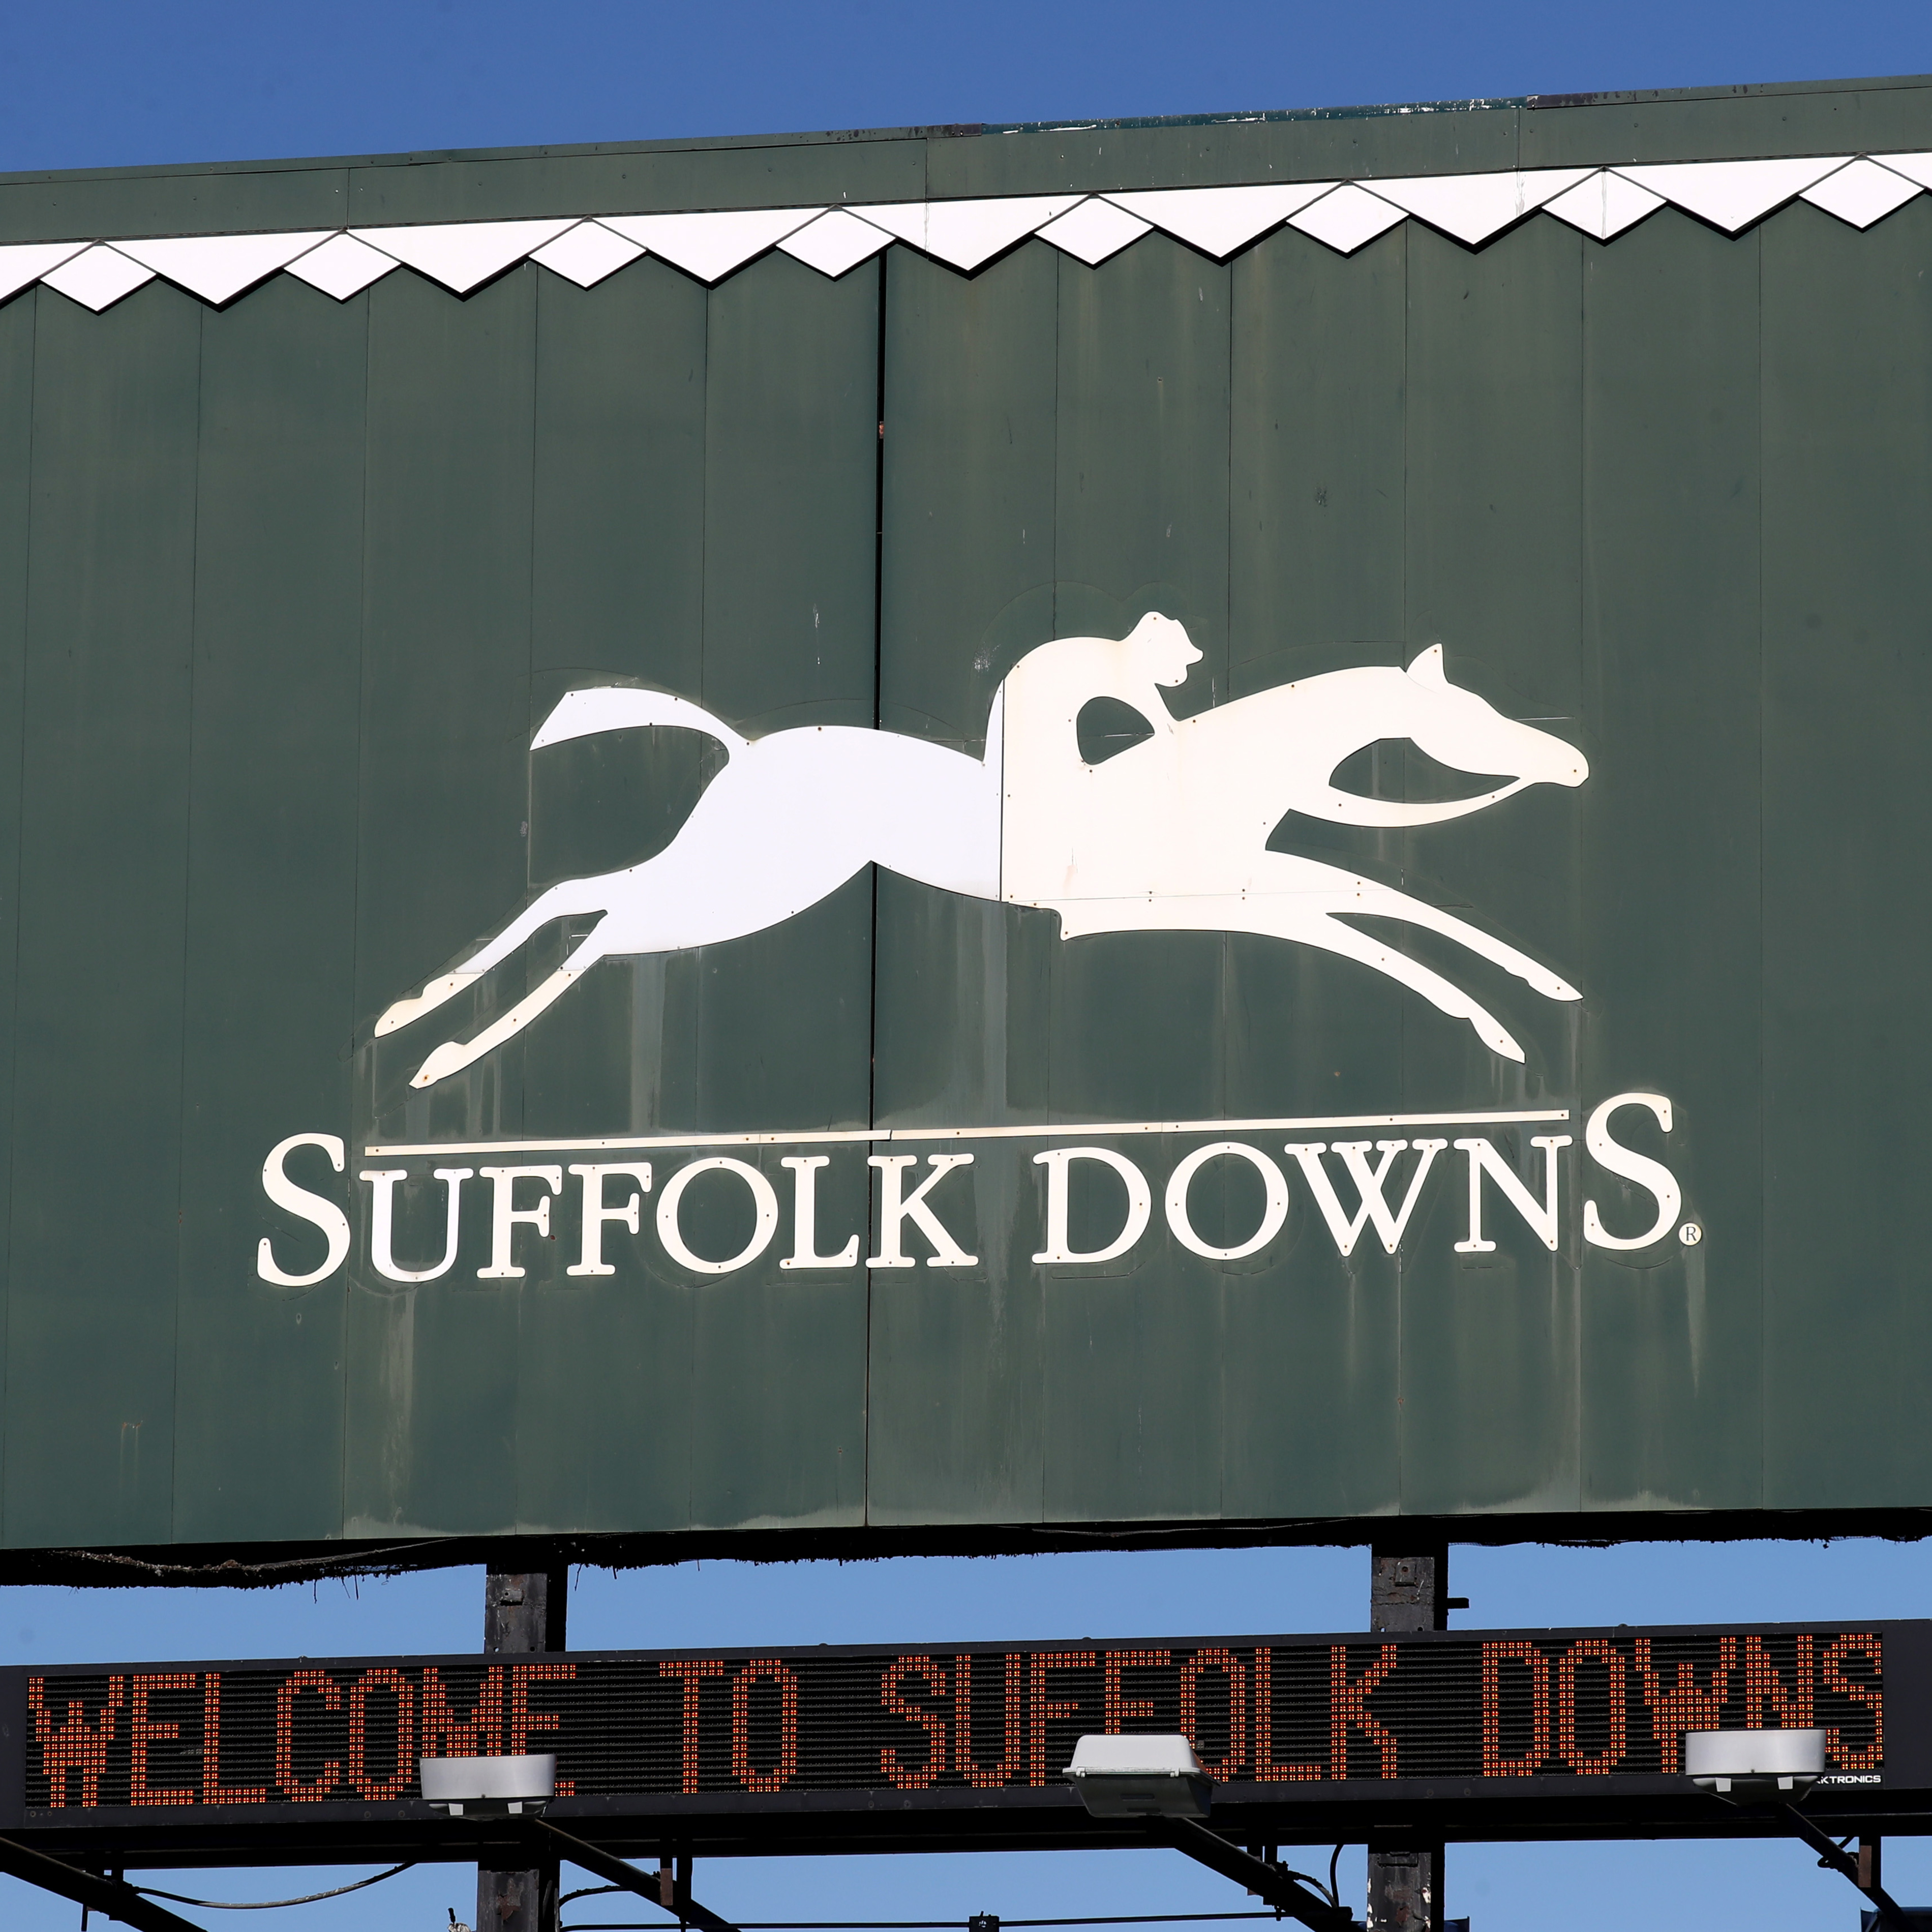 Historic Suffolk Downs Racetrack Catches Fire in Boston